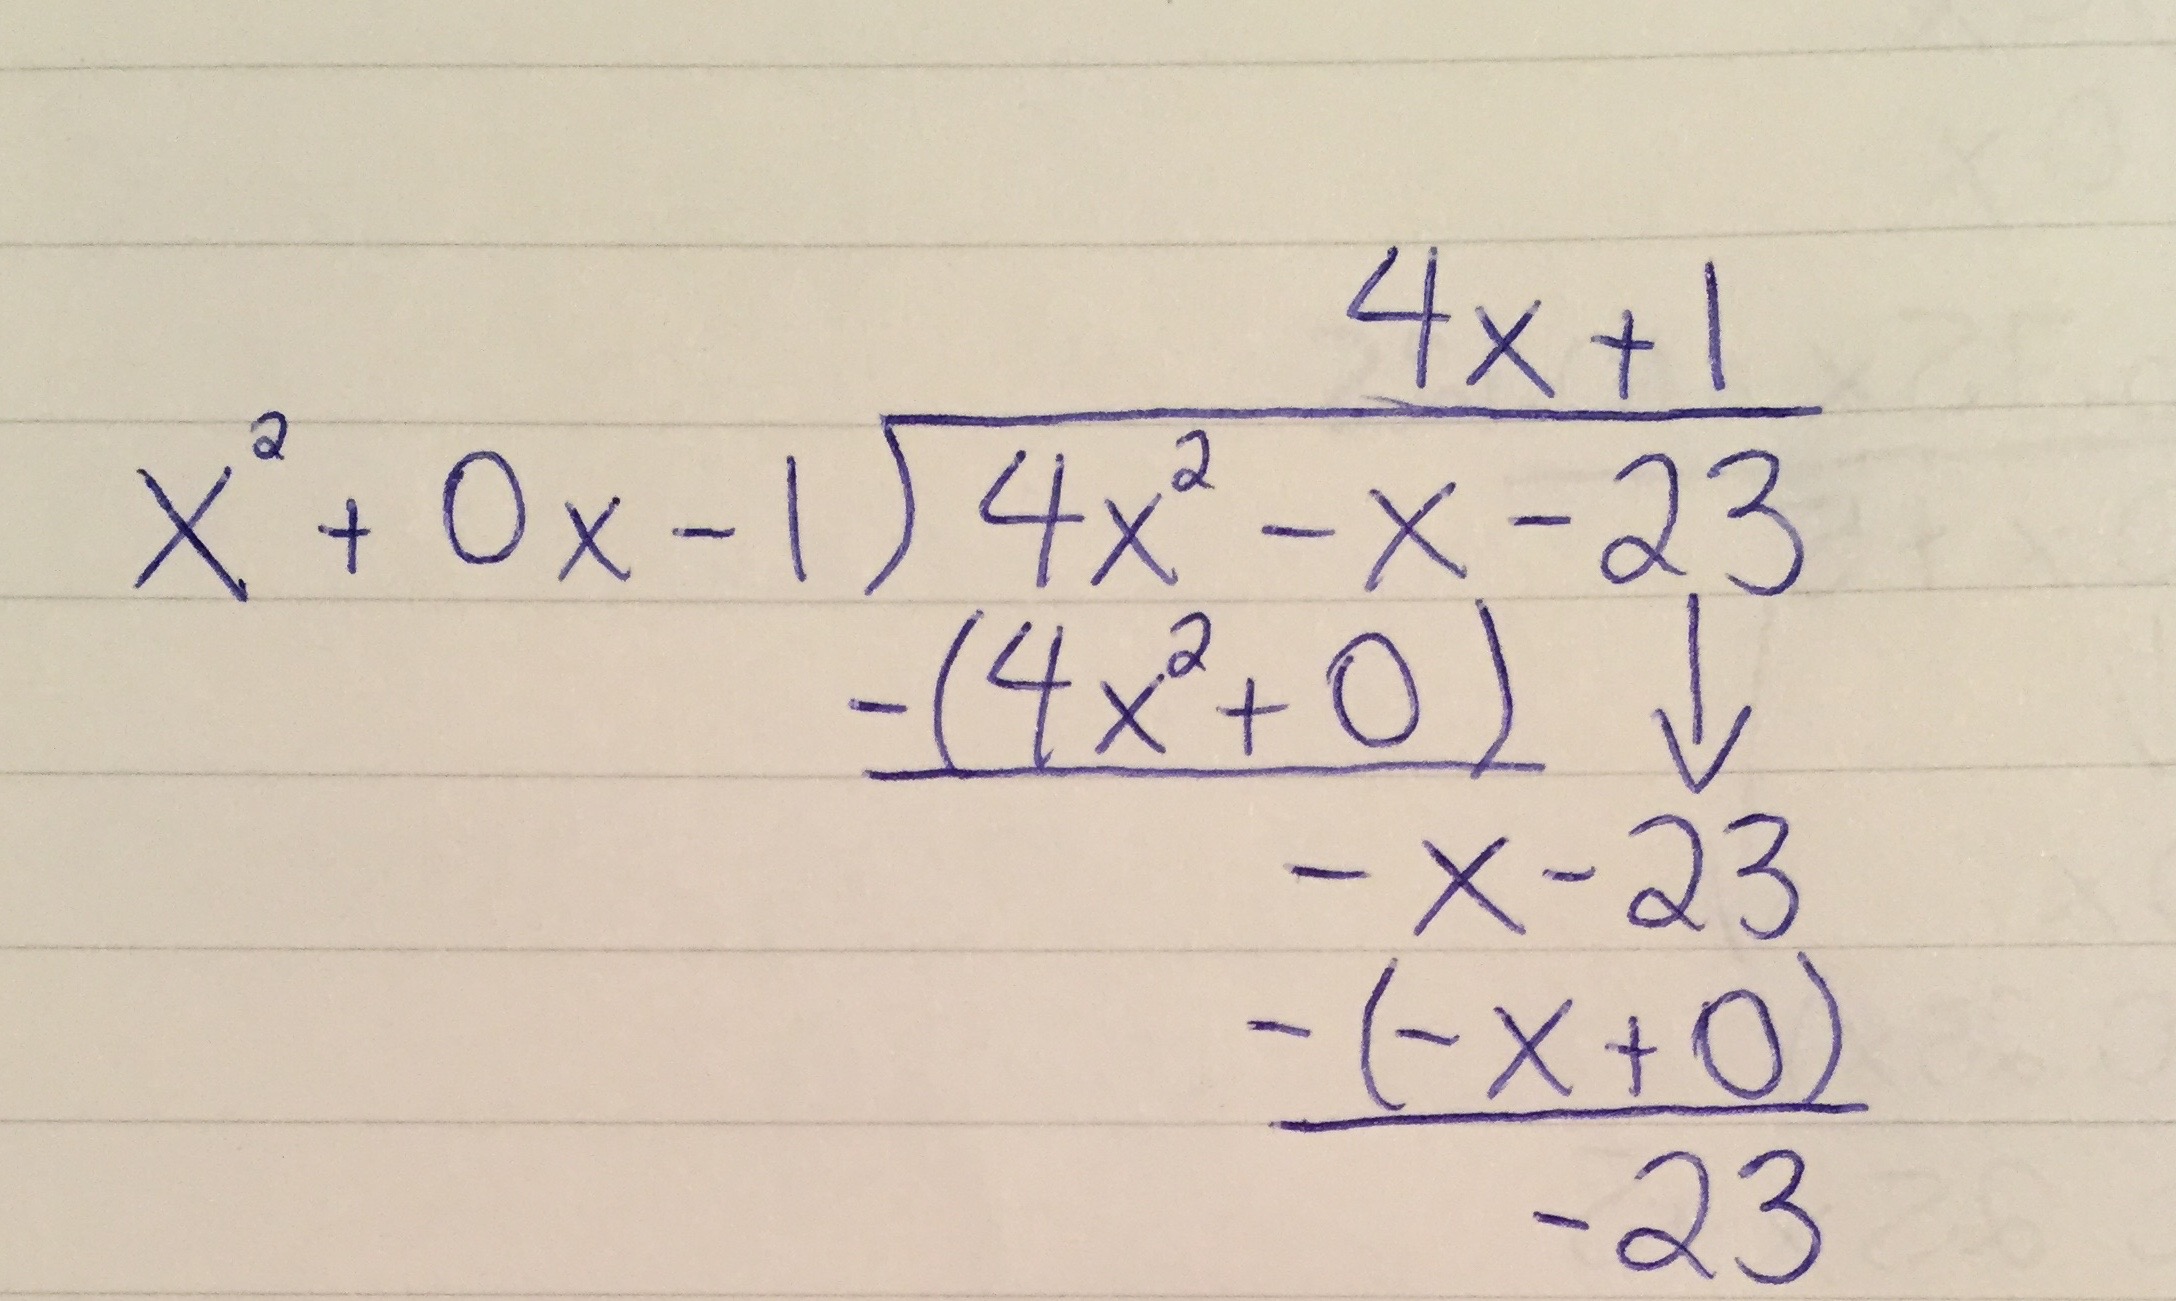 How do you use polynomial long division to divide (2222x^22-x-222)div(x